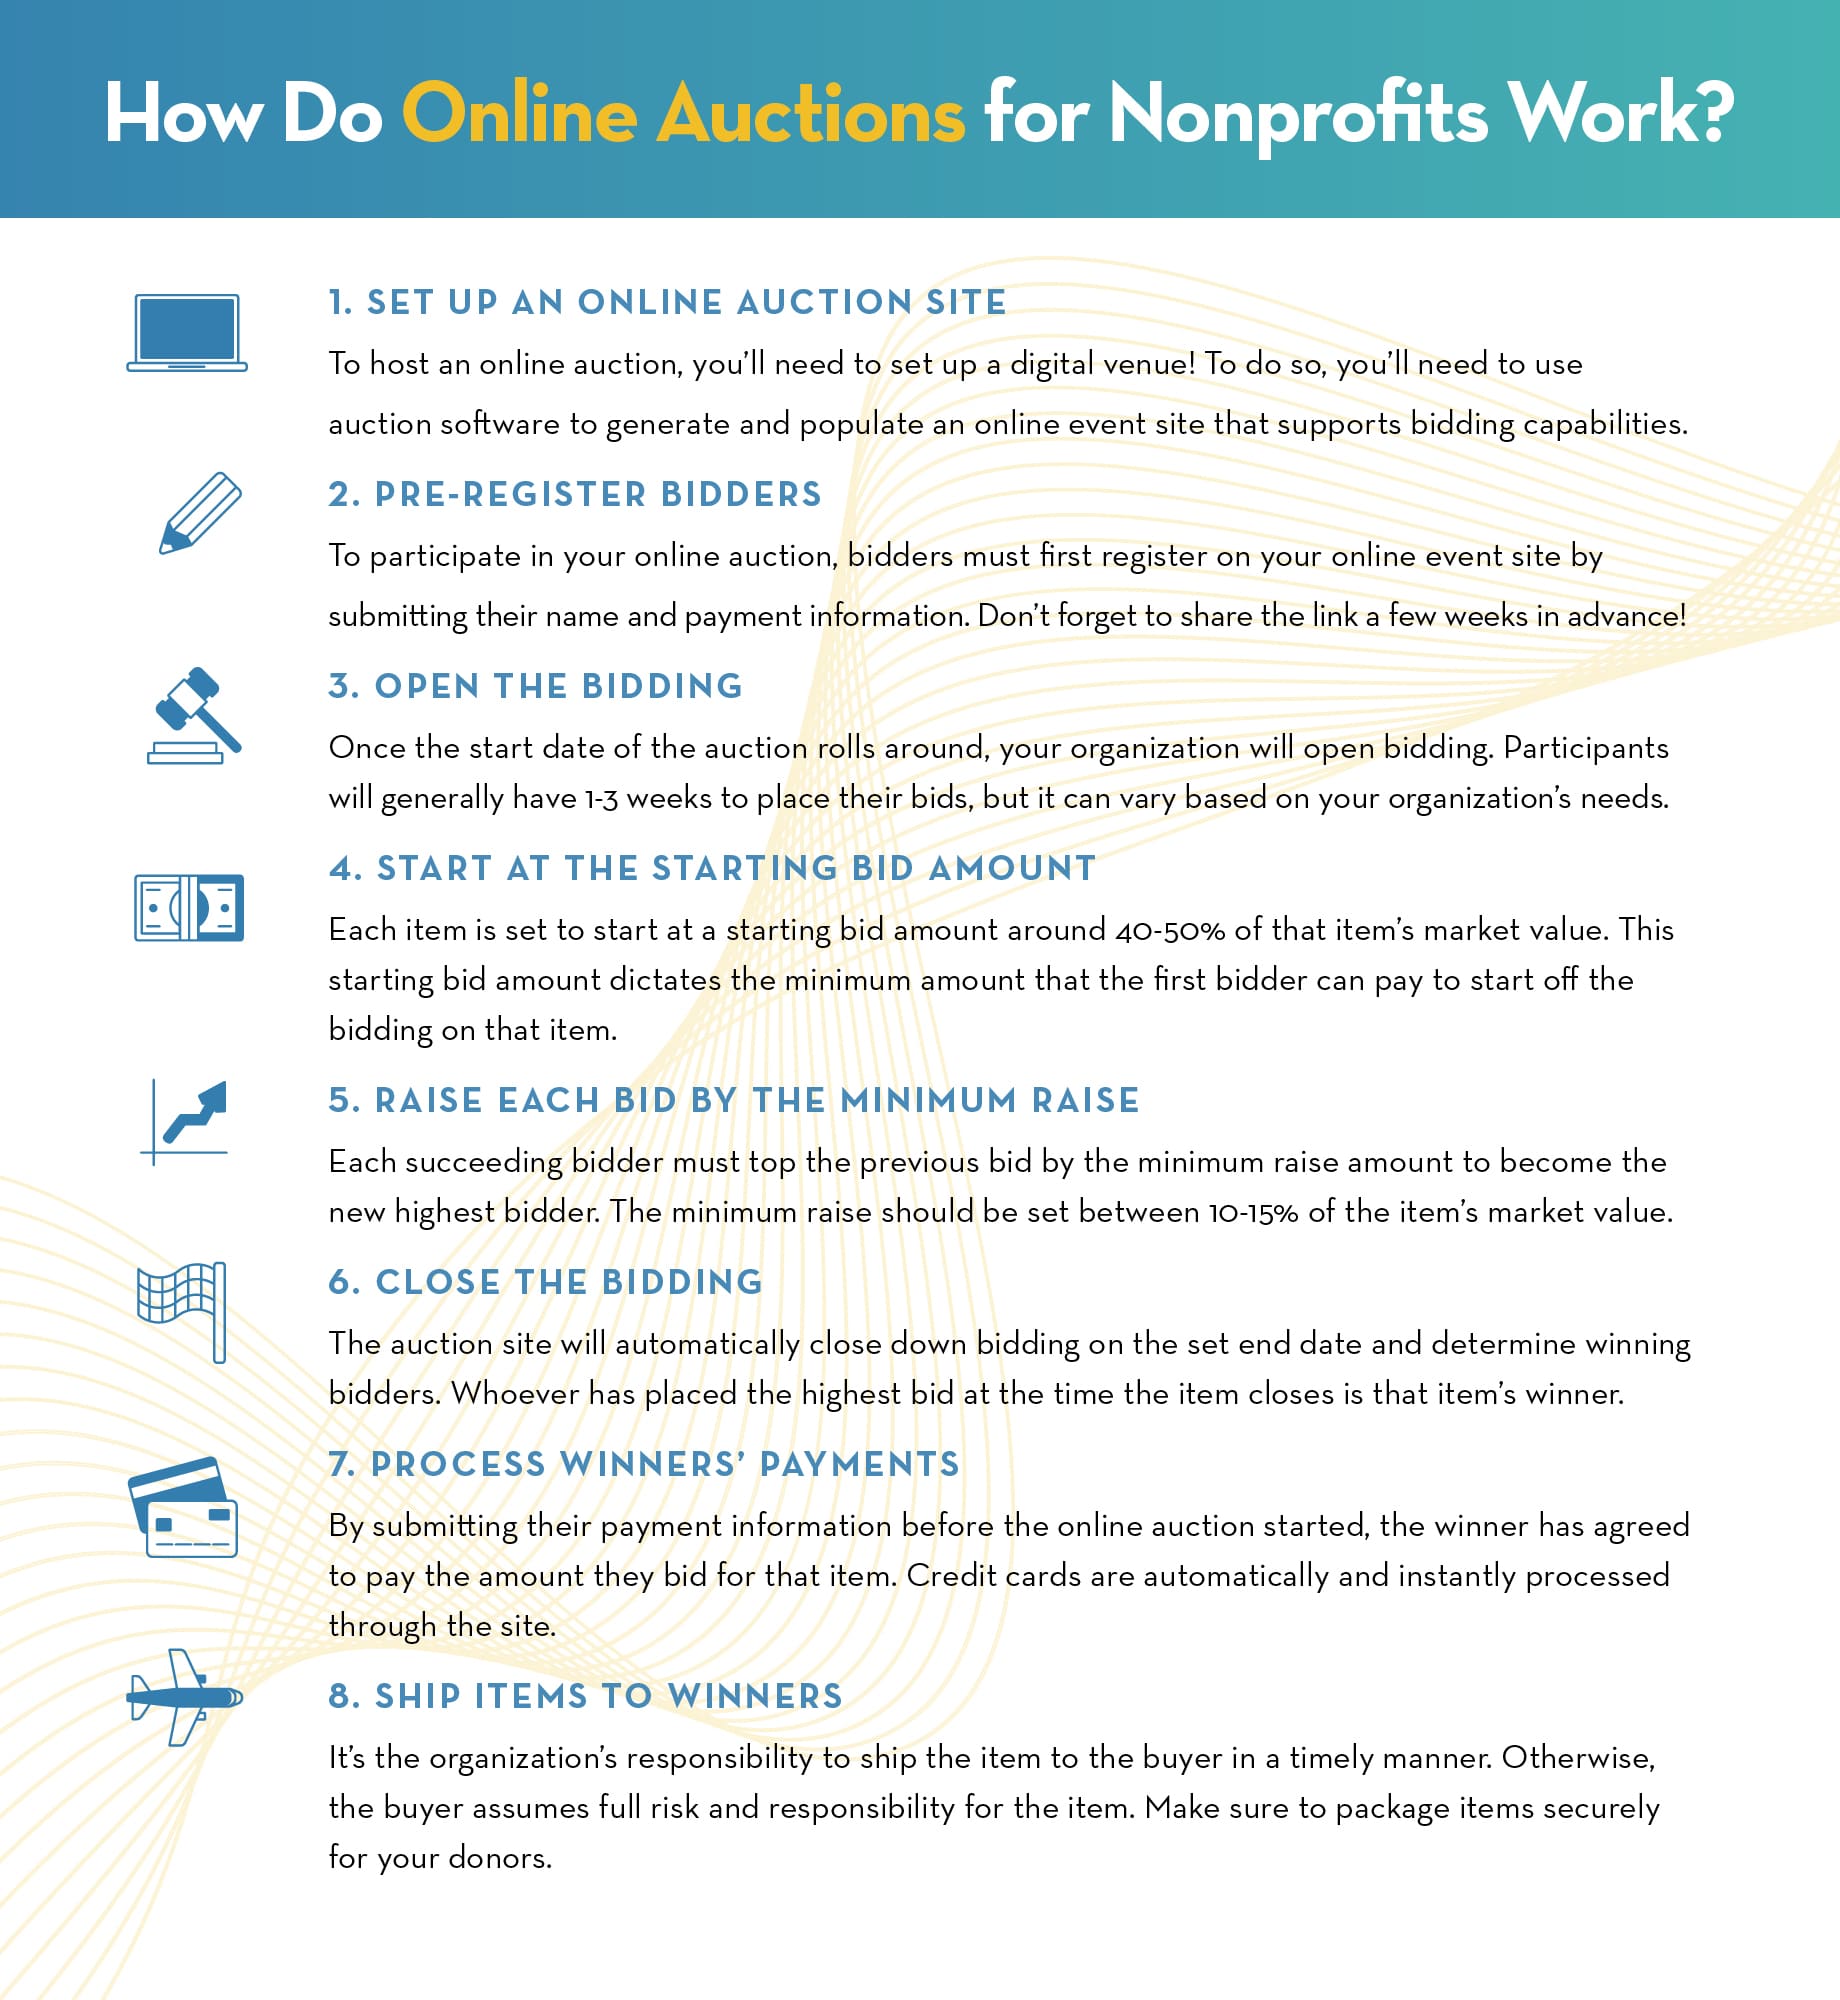 How do online auctions work